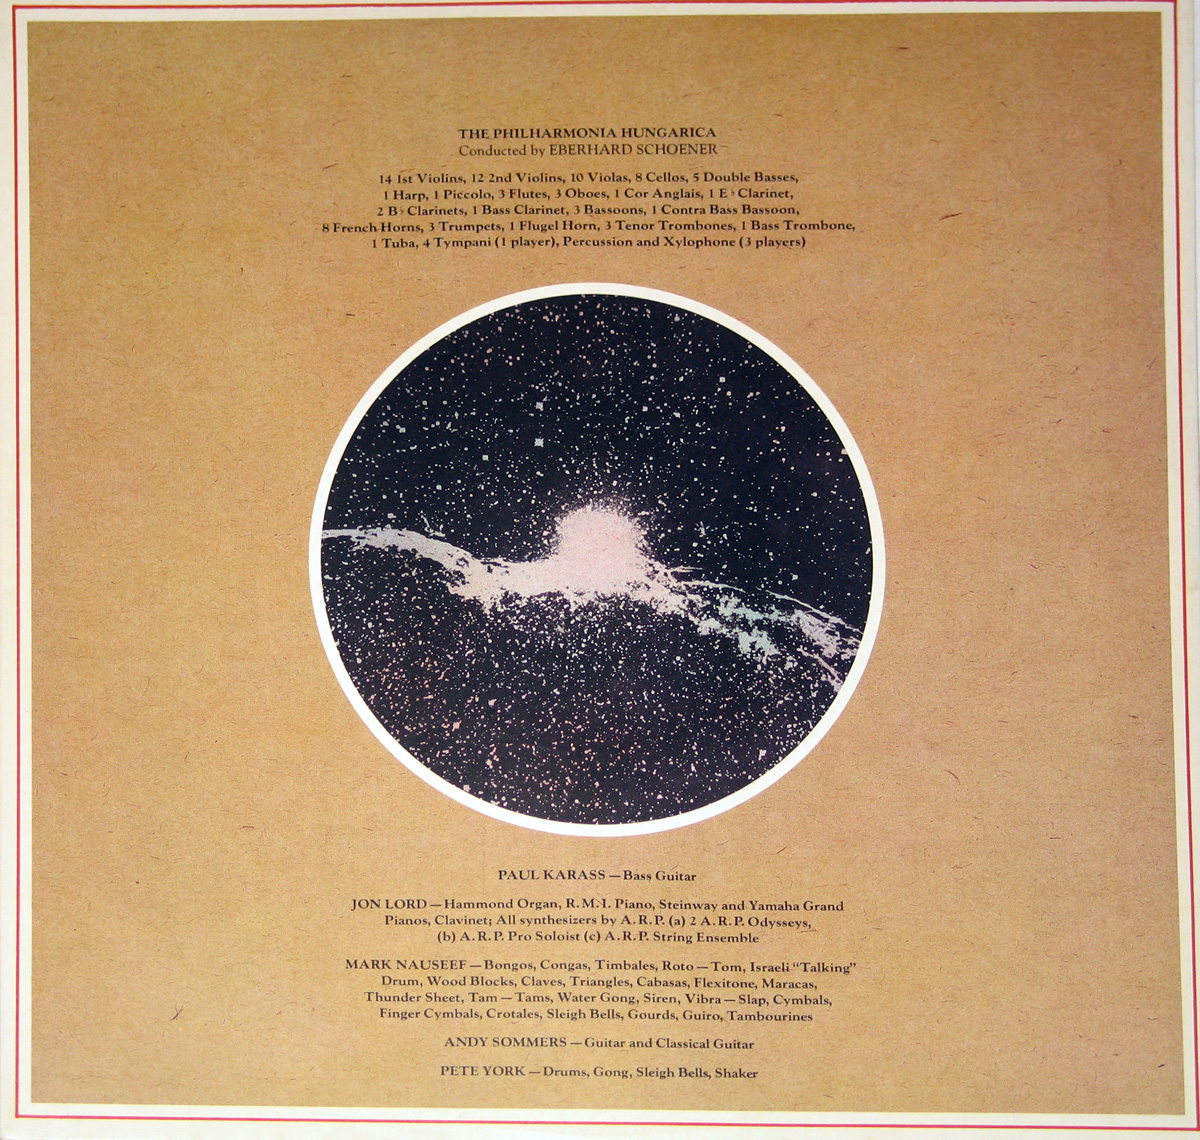 JON LORD - Sarabande - Hörzu Release with die-cut album cover back cover